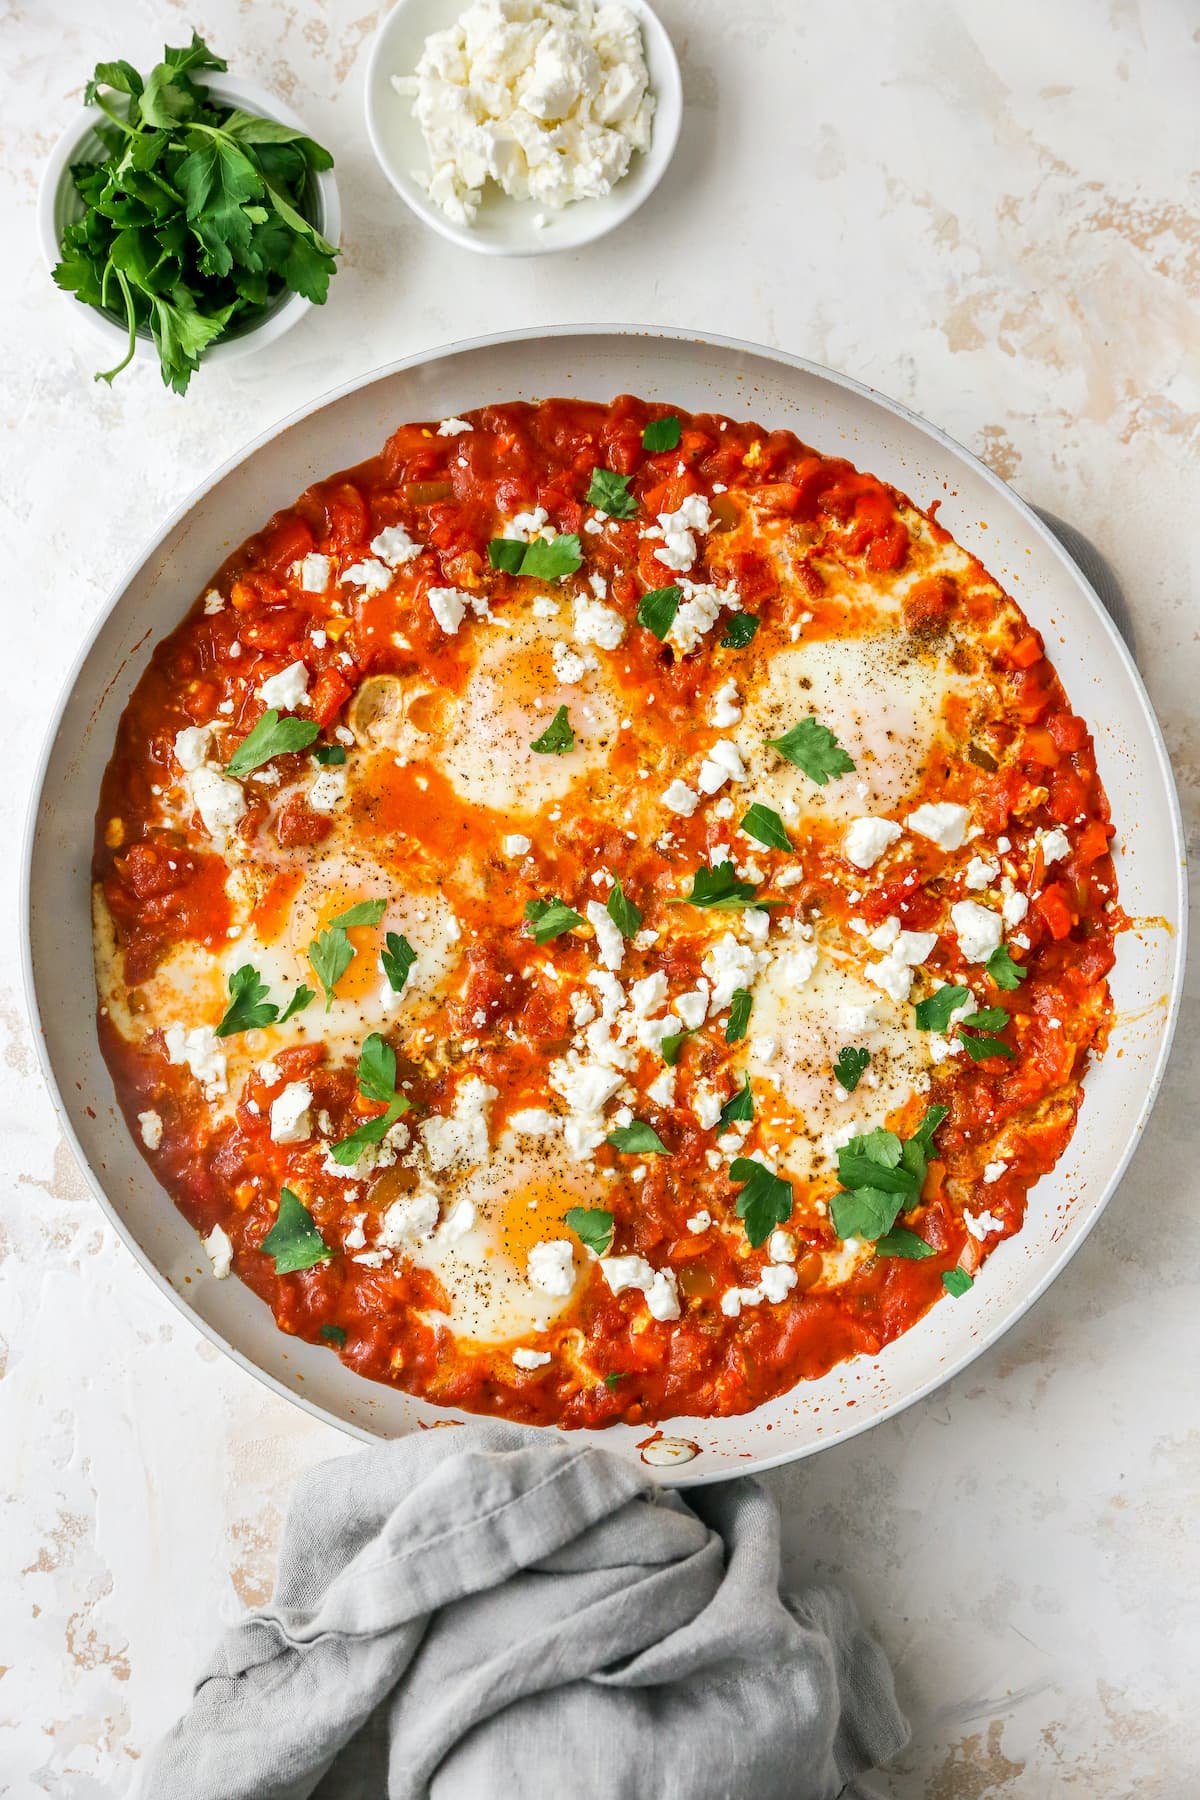 Cooked shakshuka in a sauté pan with fresh herbs and feta on top.